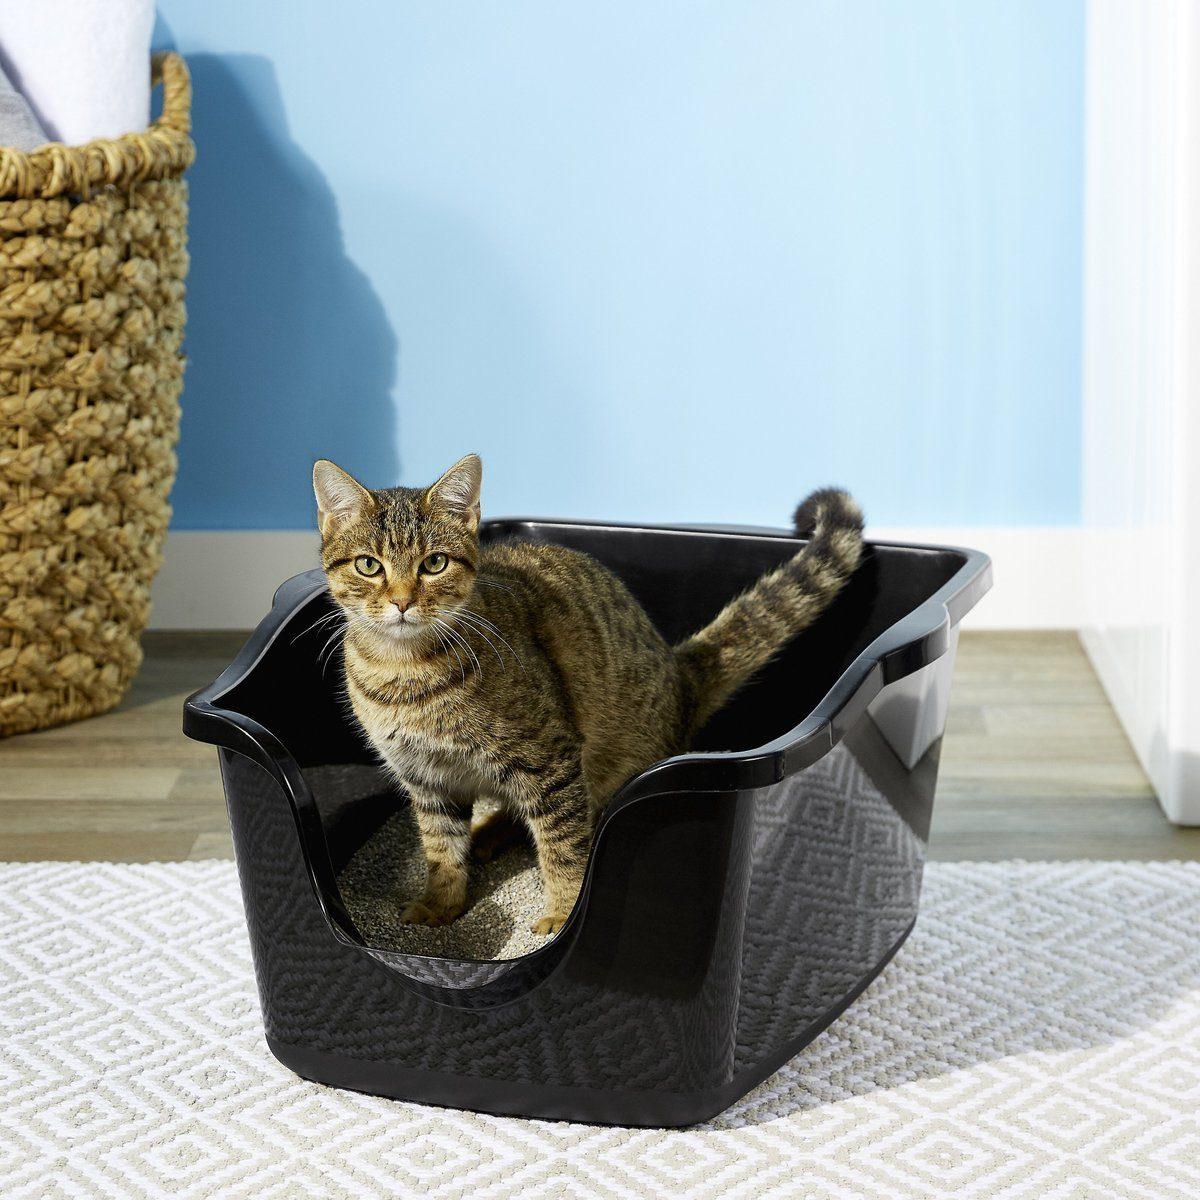 The 9 Best Cat Litter Box Options, According to Our Pet Expert